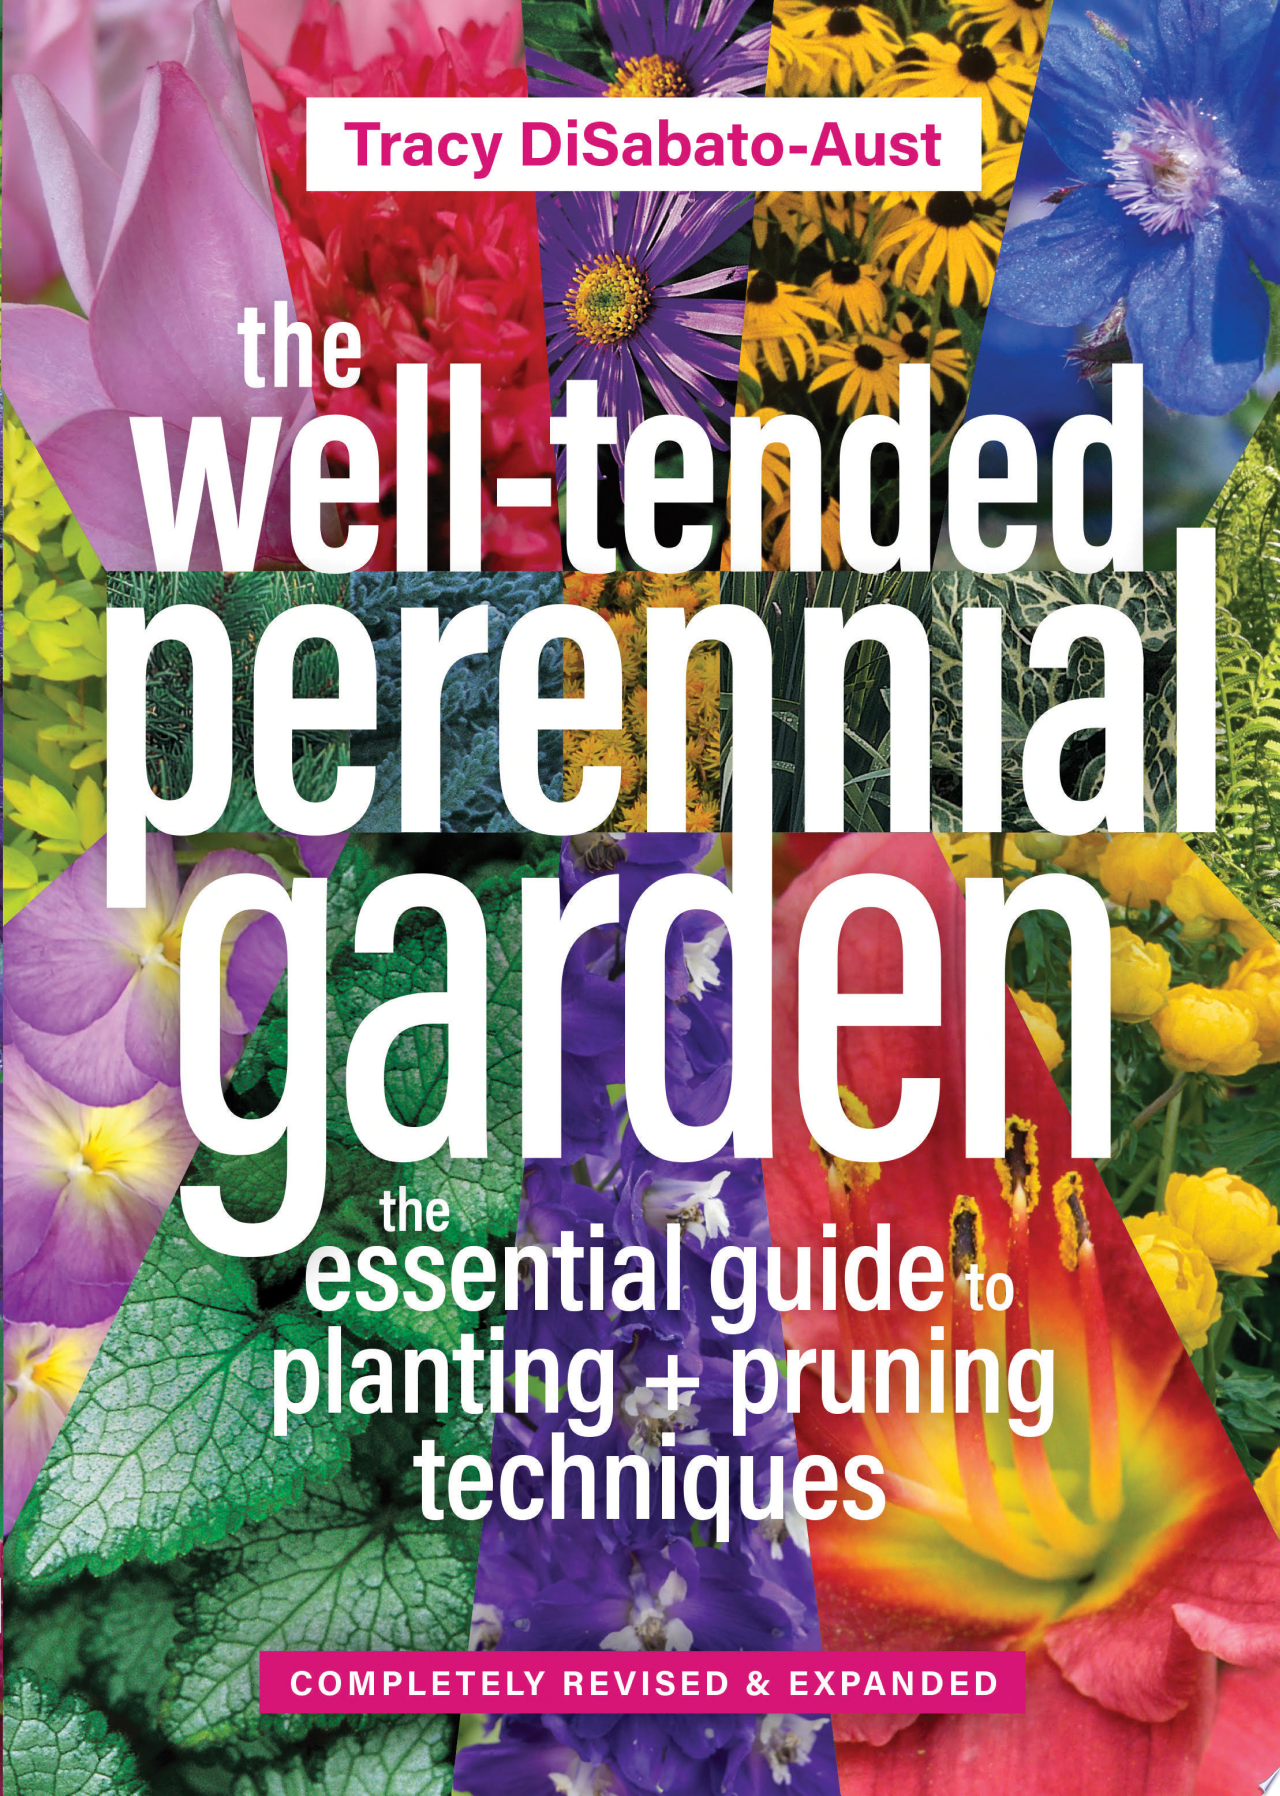 Image for "The Well-Tended Perennial Garden"